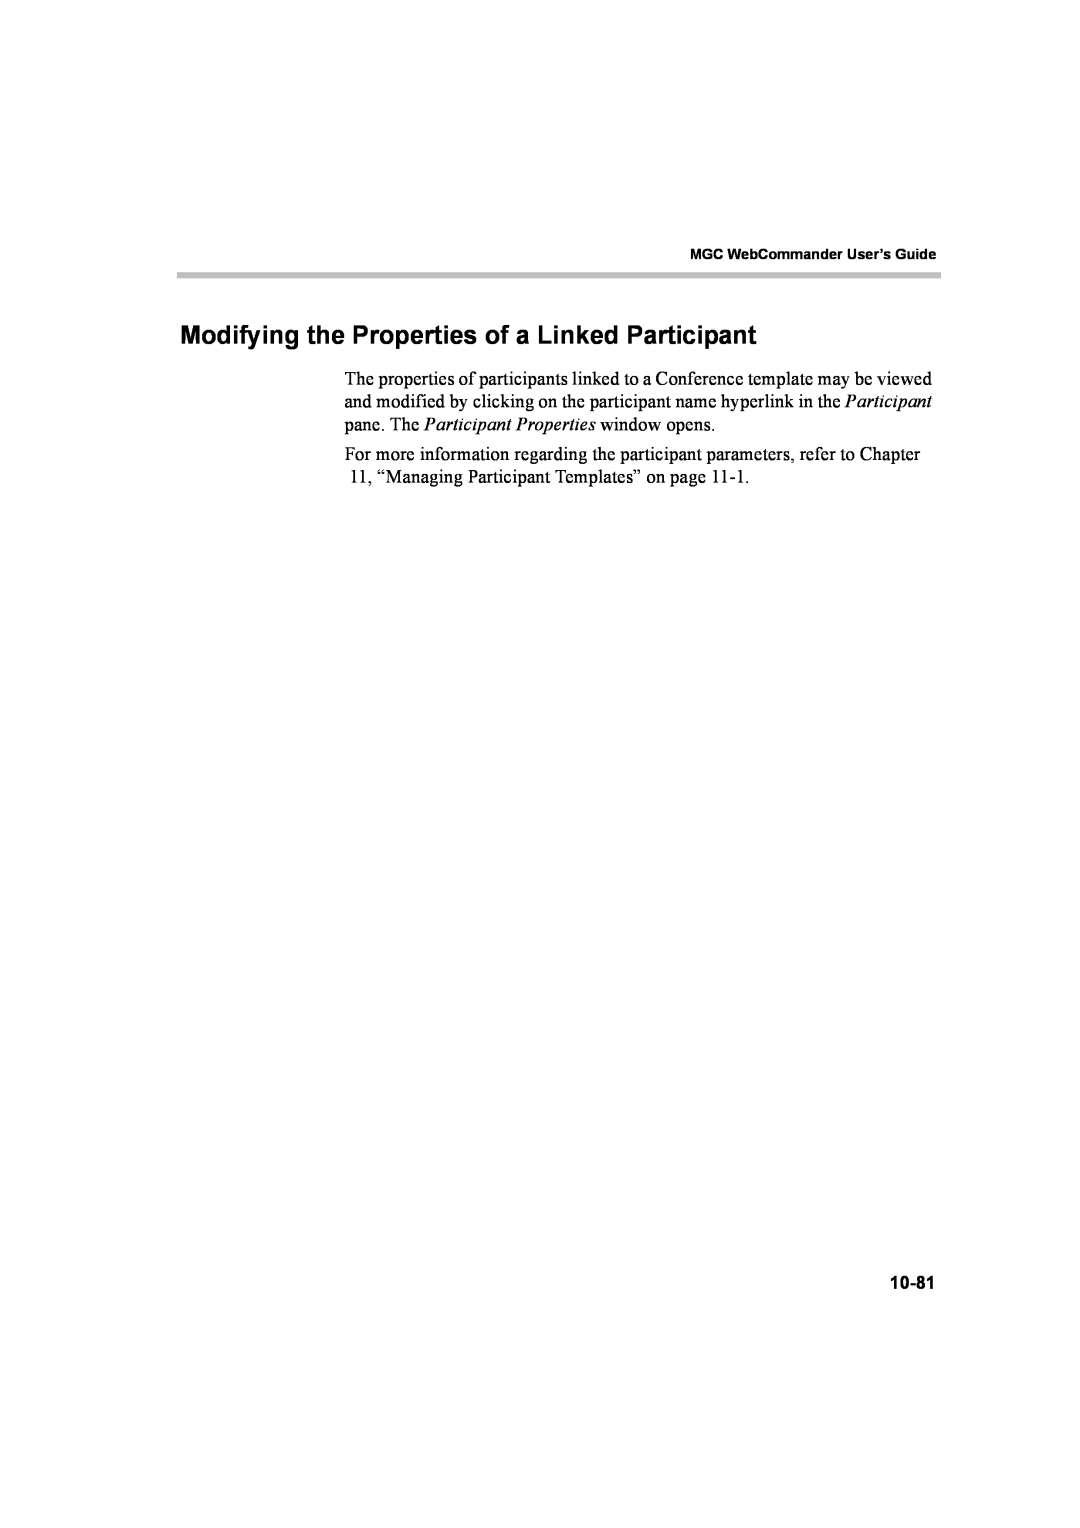 Polycom 8 manual Modifying the Properties of a Linked Participant 